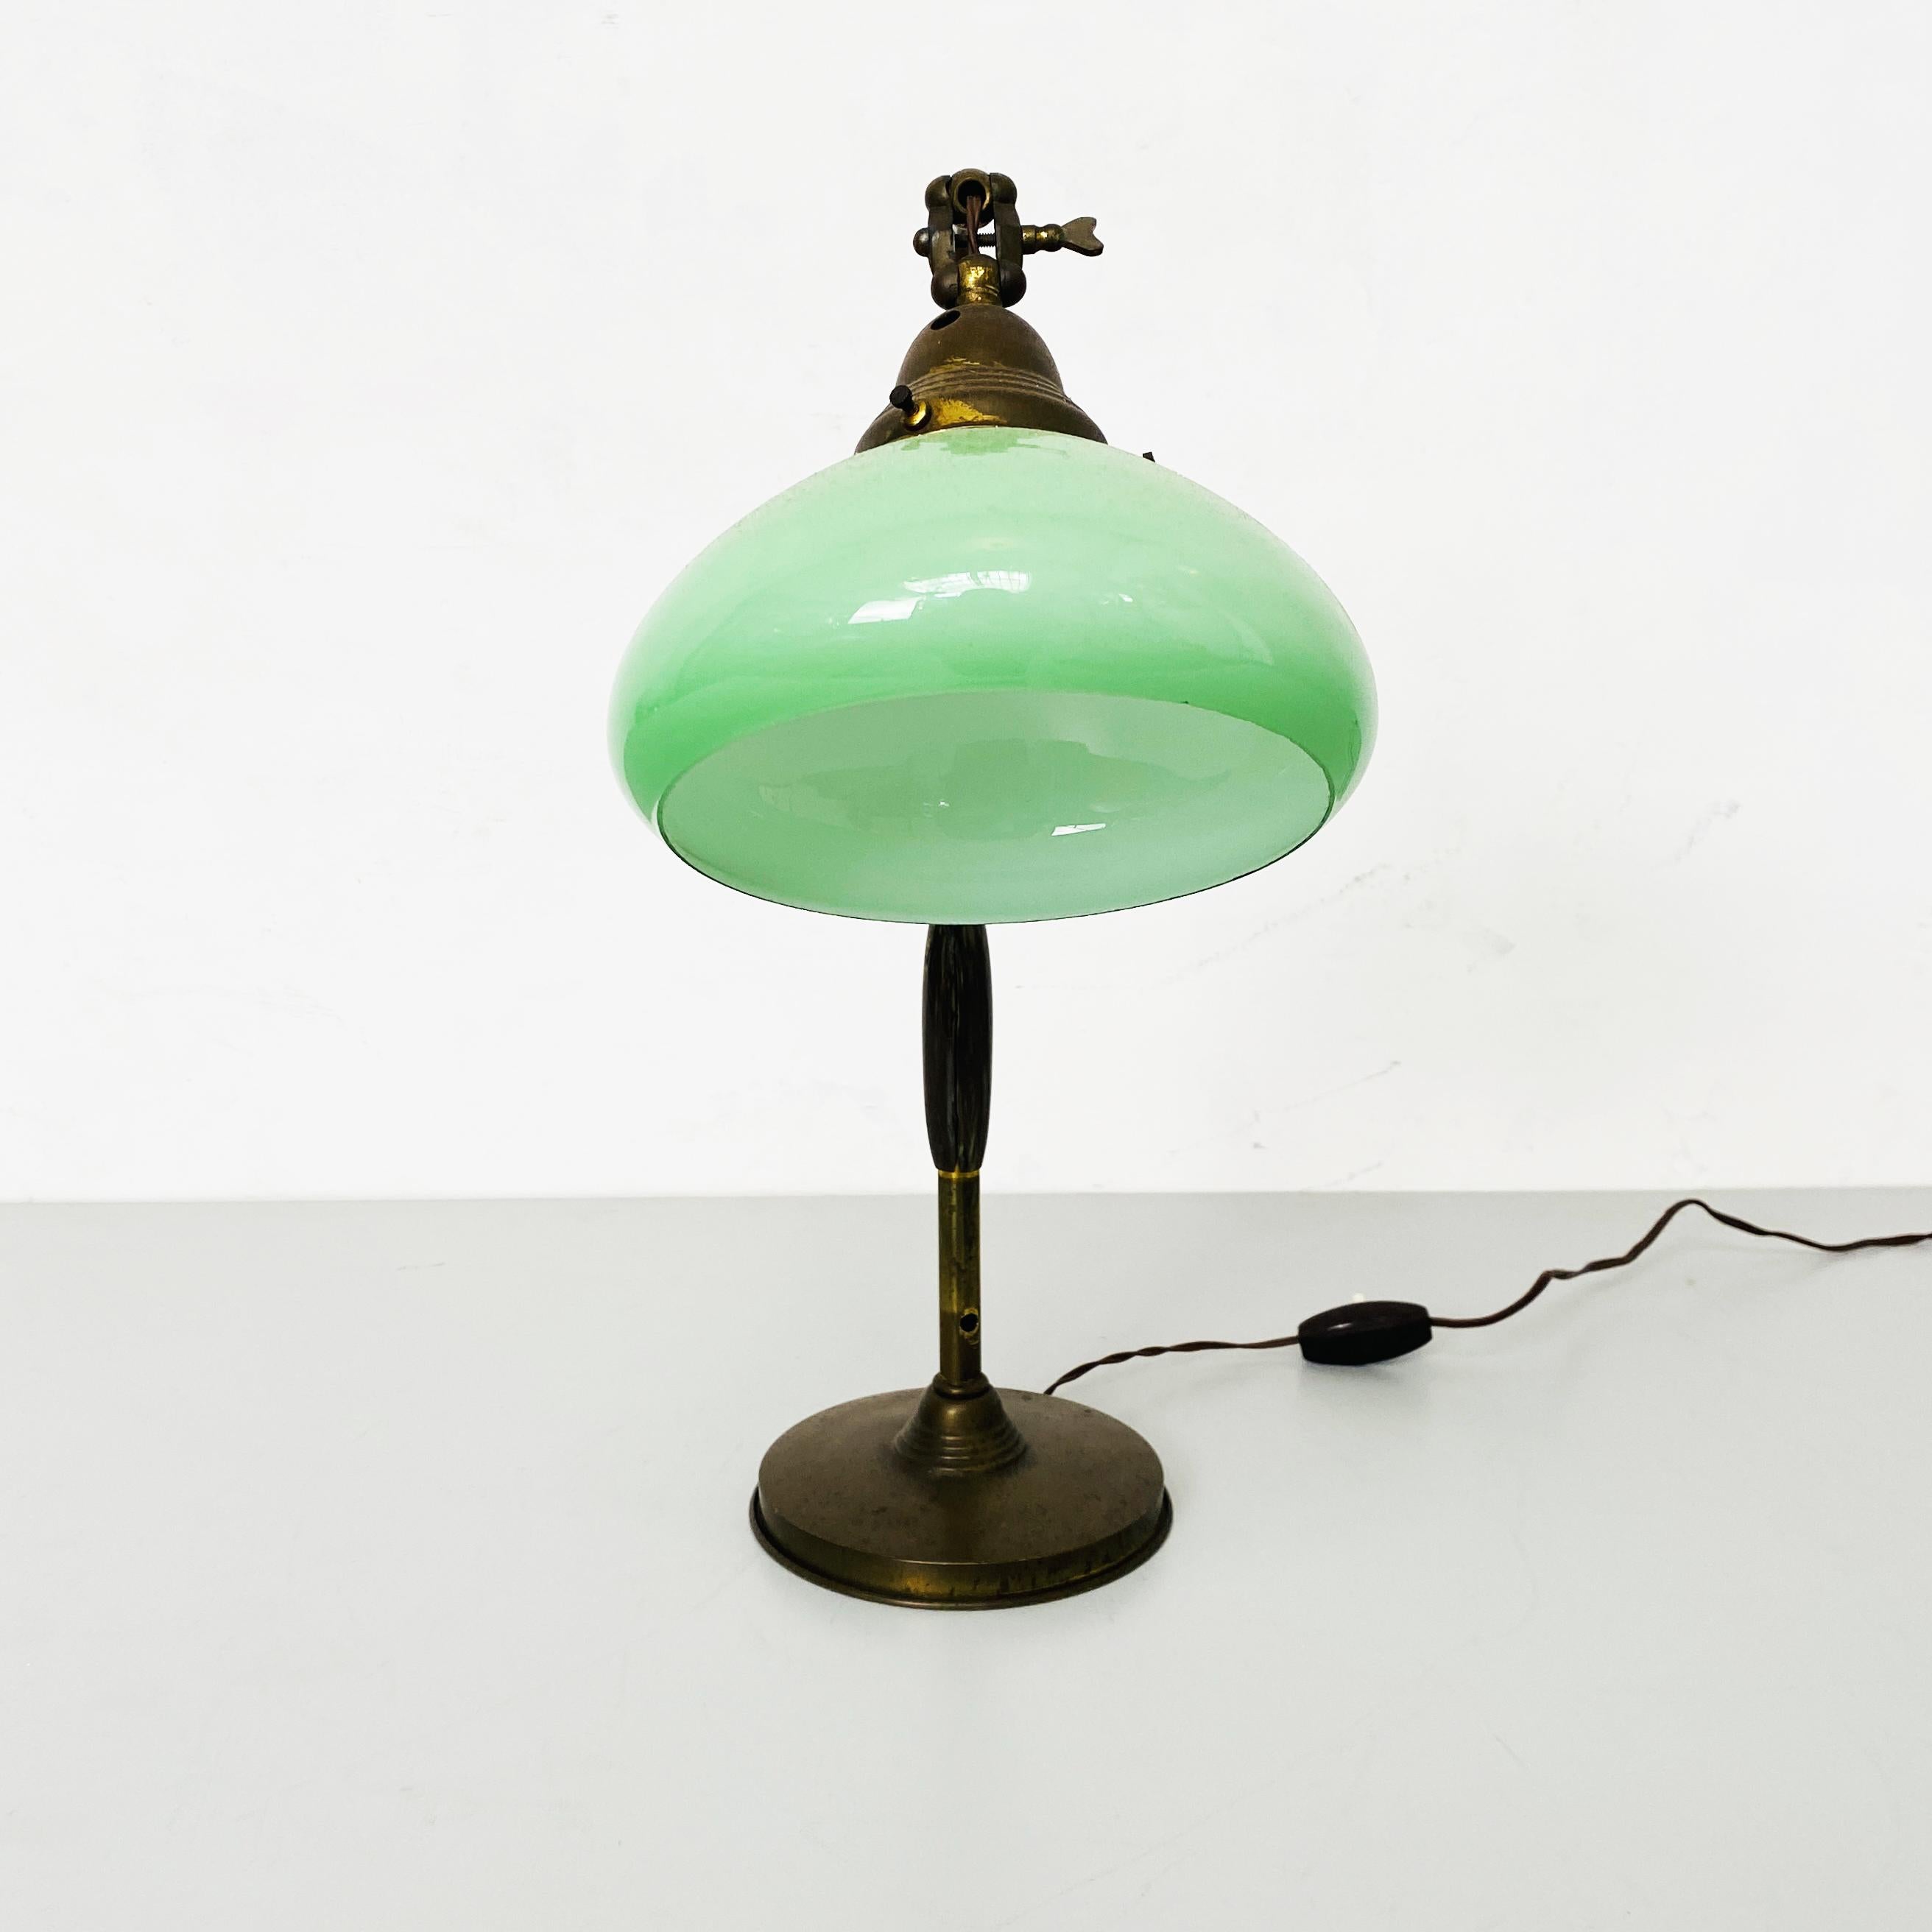 Italian Art Deco Ministerial table lamp in metal, green glass and bakelite, 1930s
Ministerial lamp with metal structure and bakelite detail, adjustable lampshade in original green glass.
1930s
Good conditions.
Measures in cm 30x15x43h.